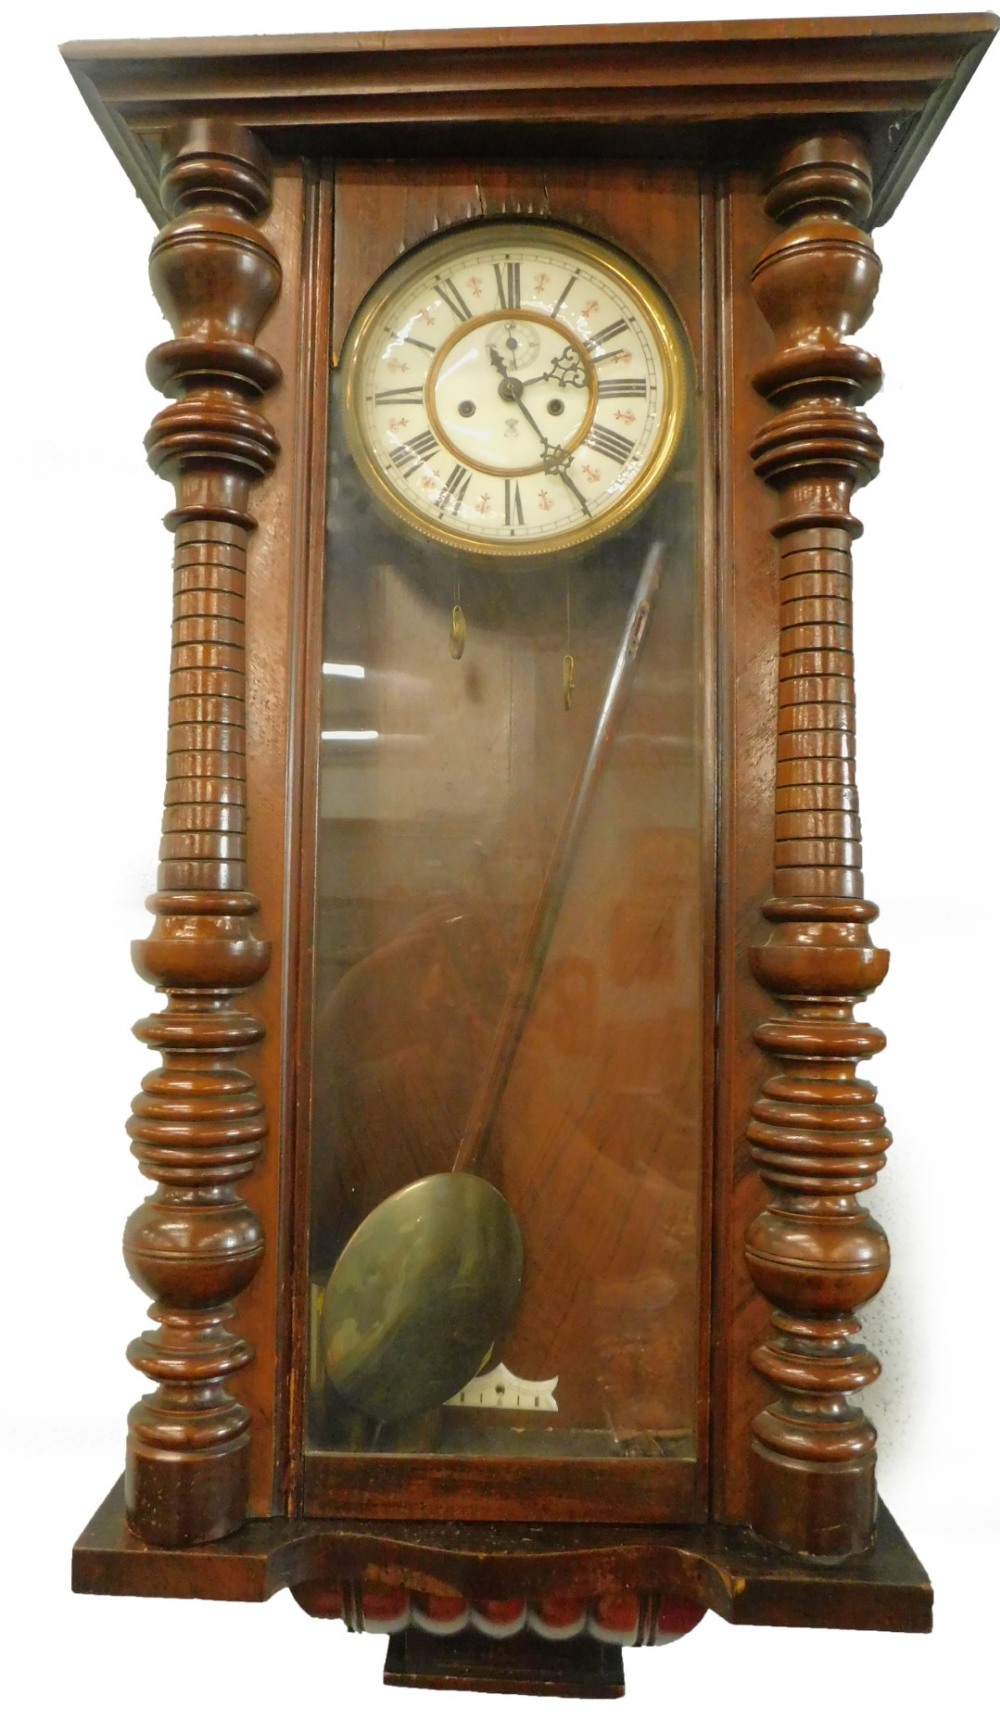 A Gustav Becker Vienna wall clock, with enamel type dial and turned pilasters, lacking crest etc.,